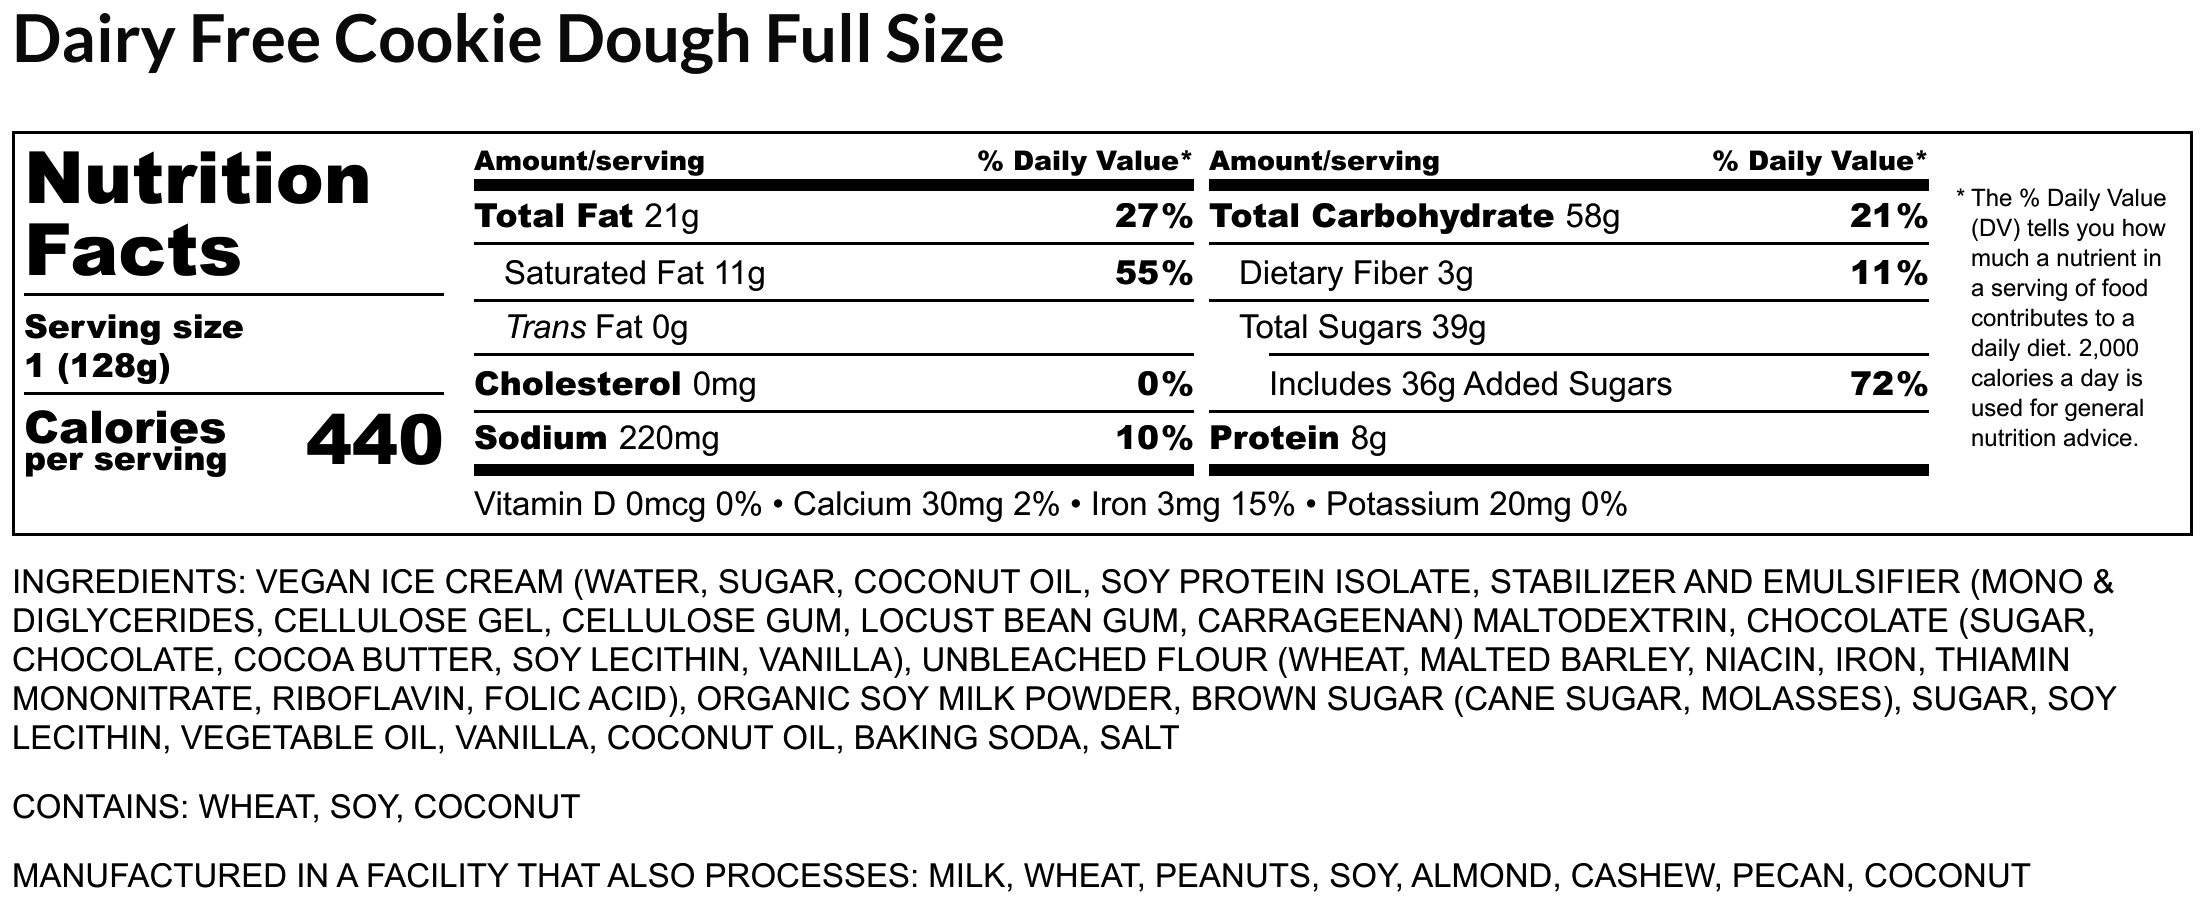 Dairy Free Cookie Dough Full Size